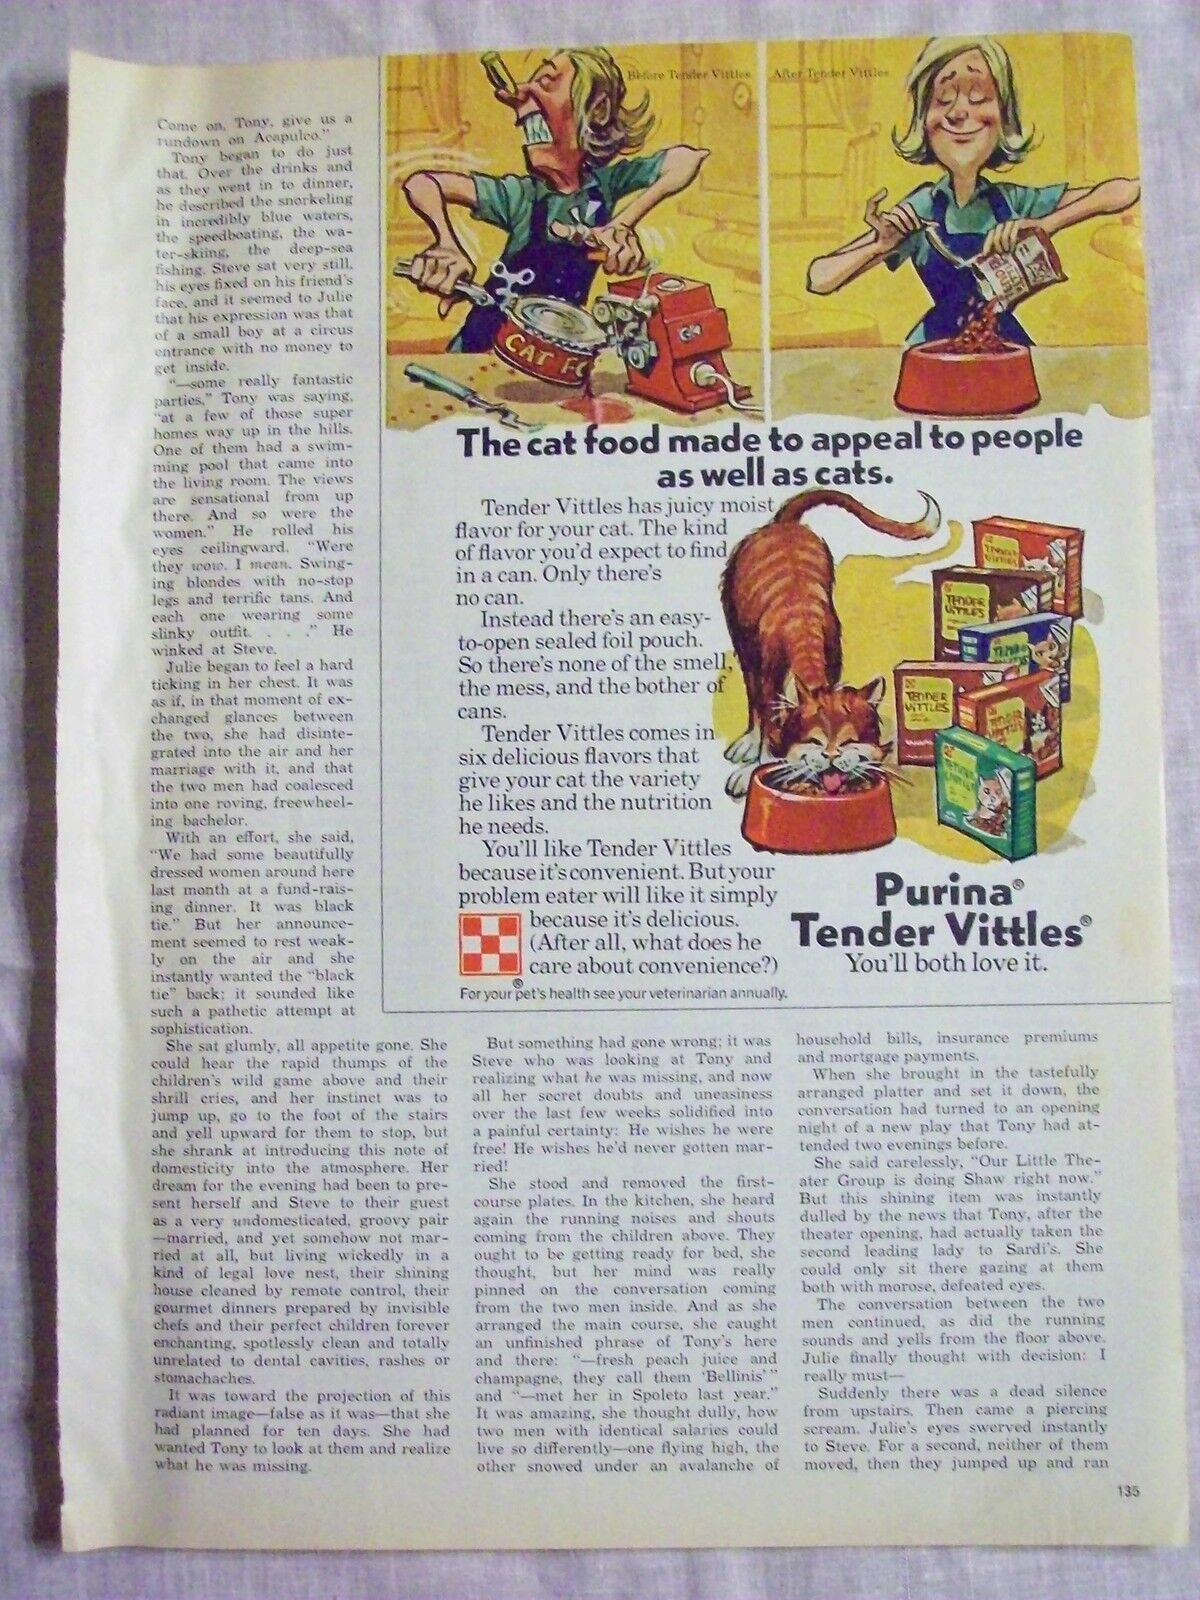 1973 Magazine Advertisement Page For Purina Tender Vittles Cat Food Cartoon Ad